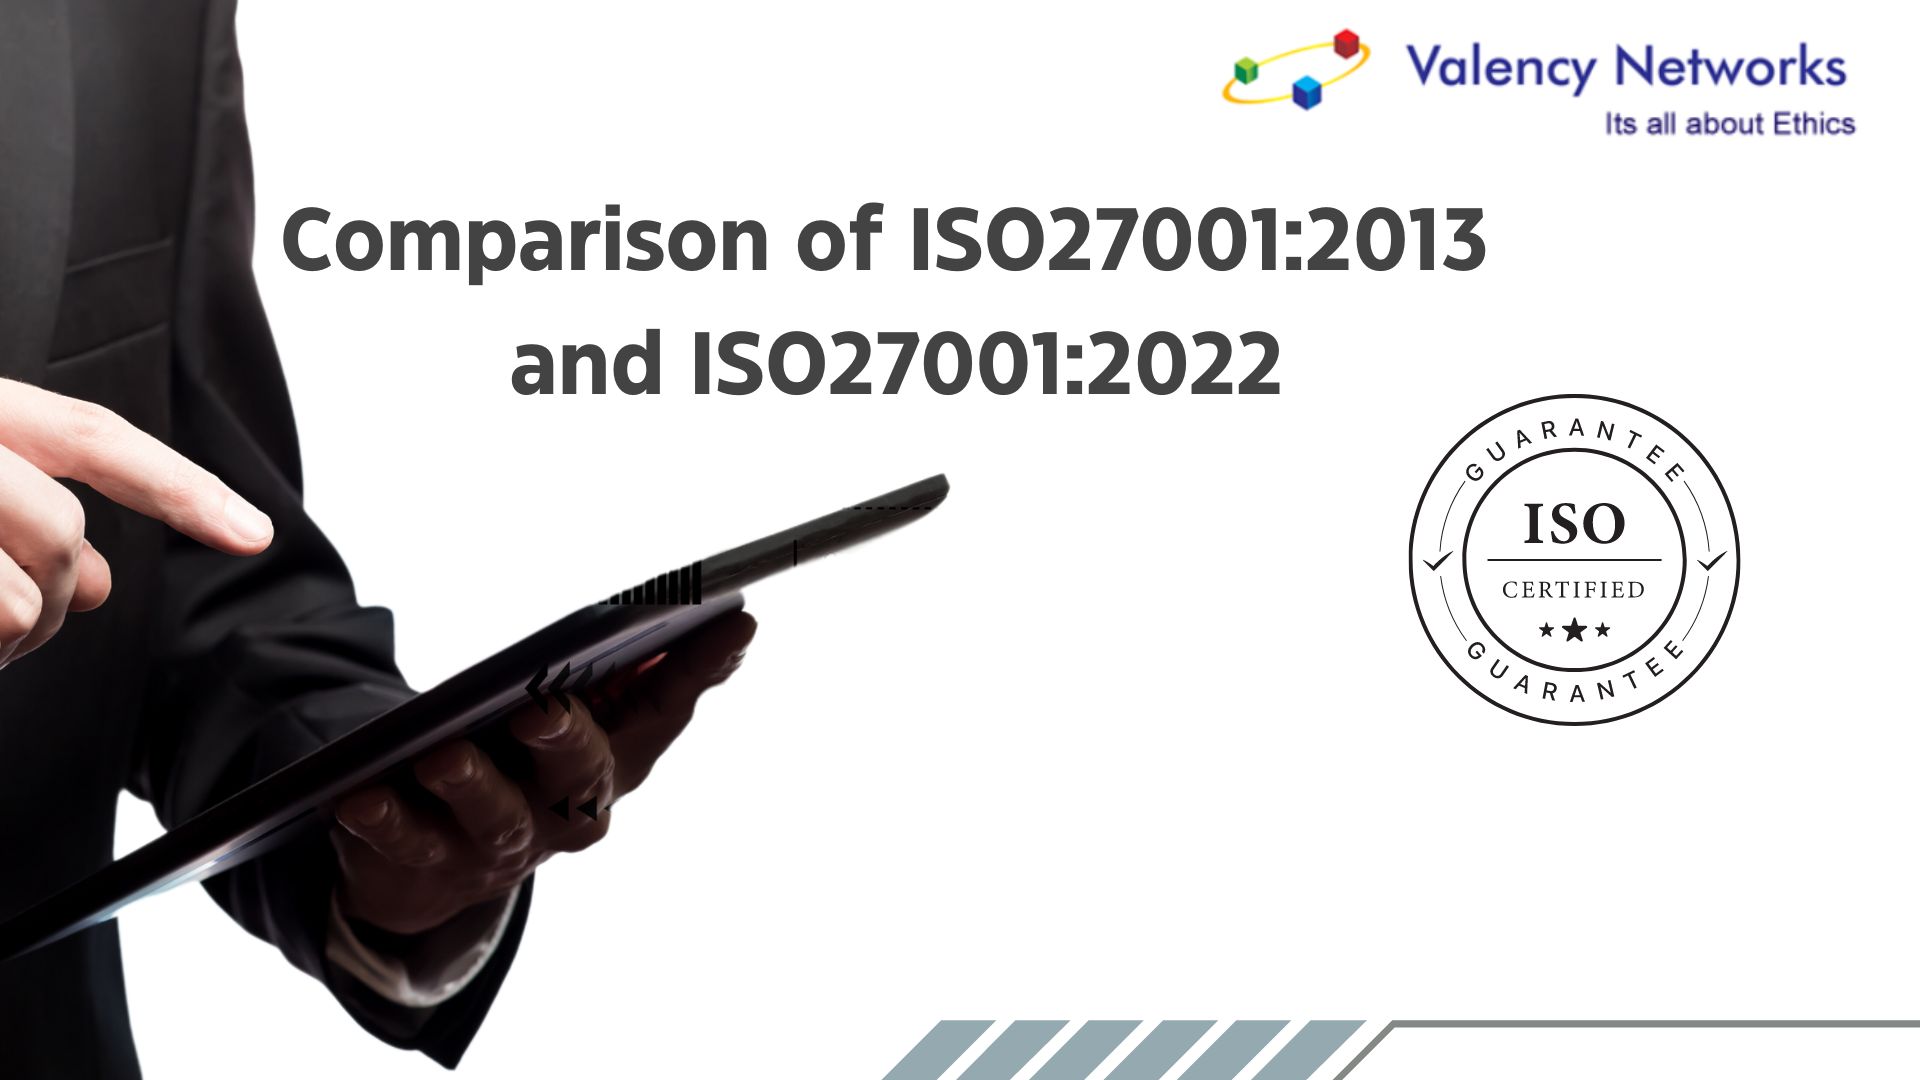 Comparison of ISO27001:2013 and ISO27001:2022